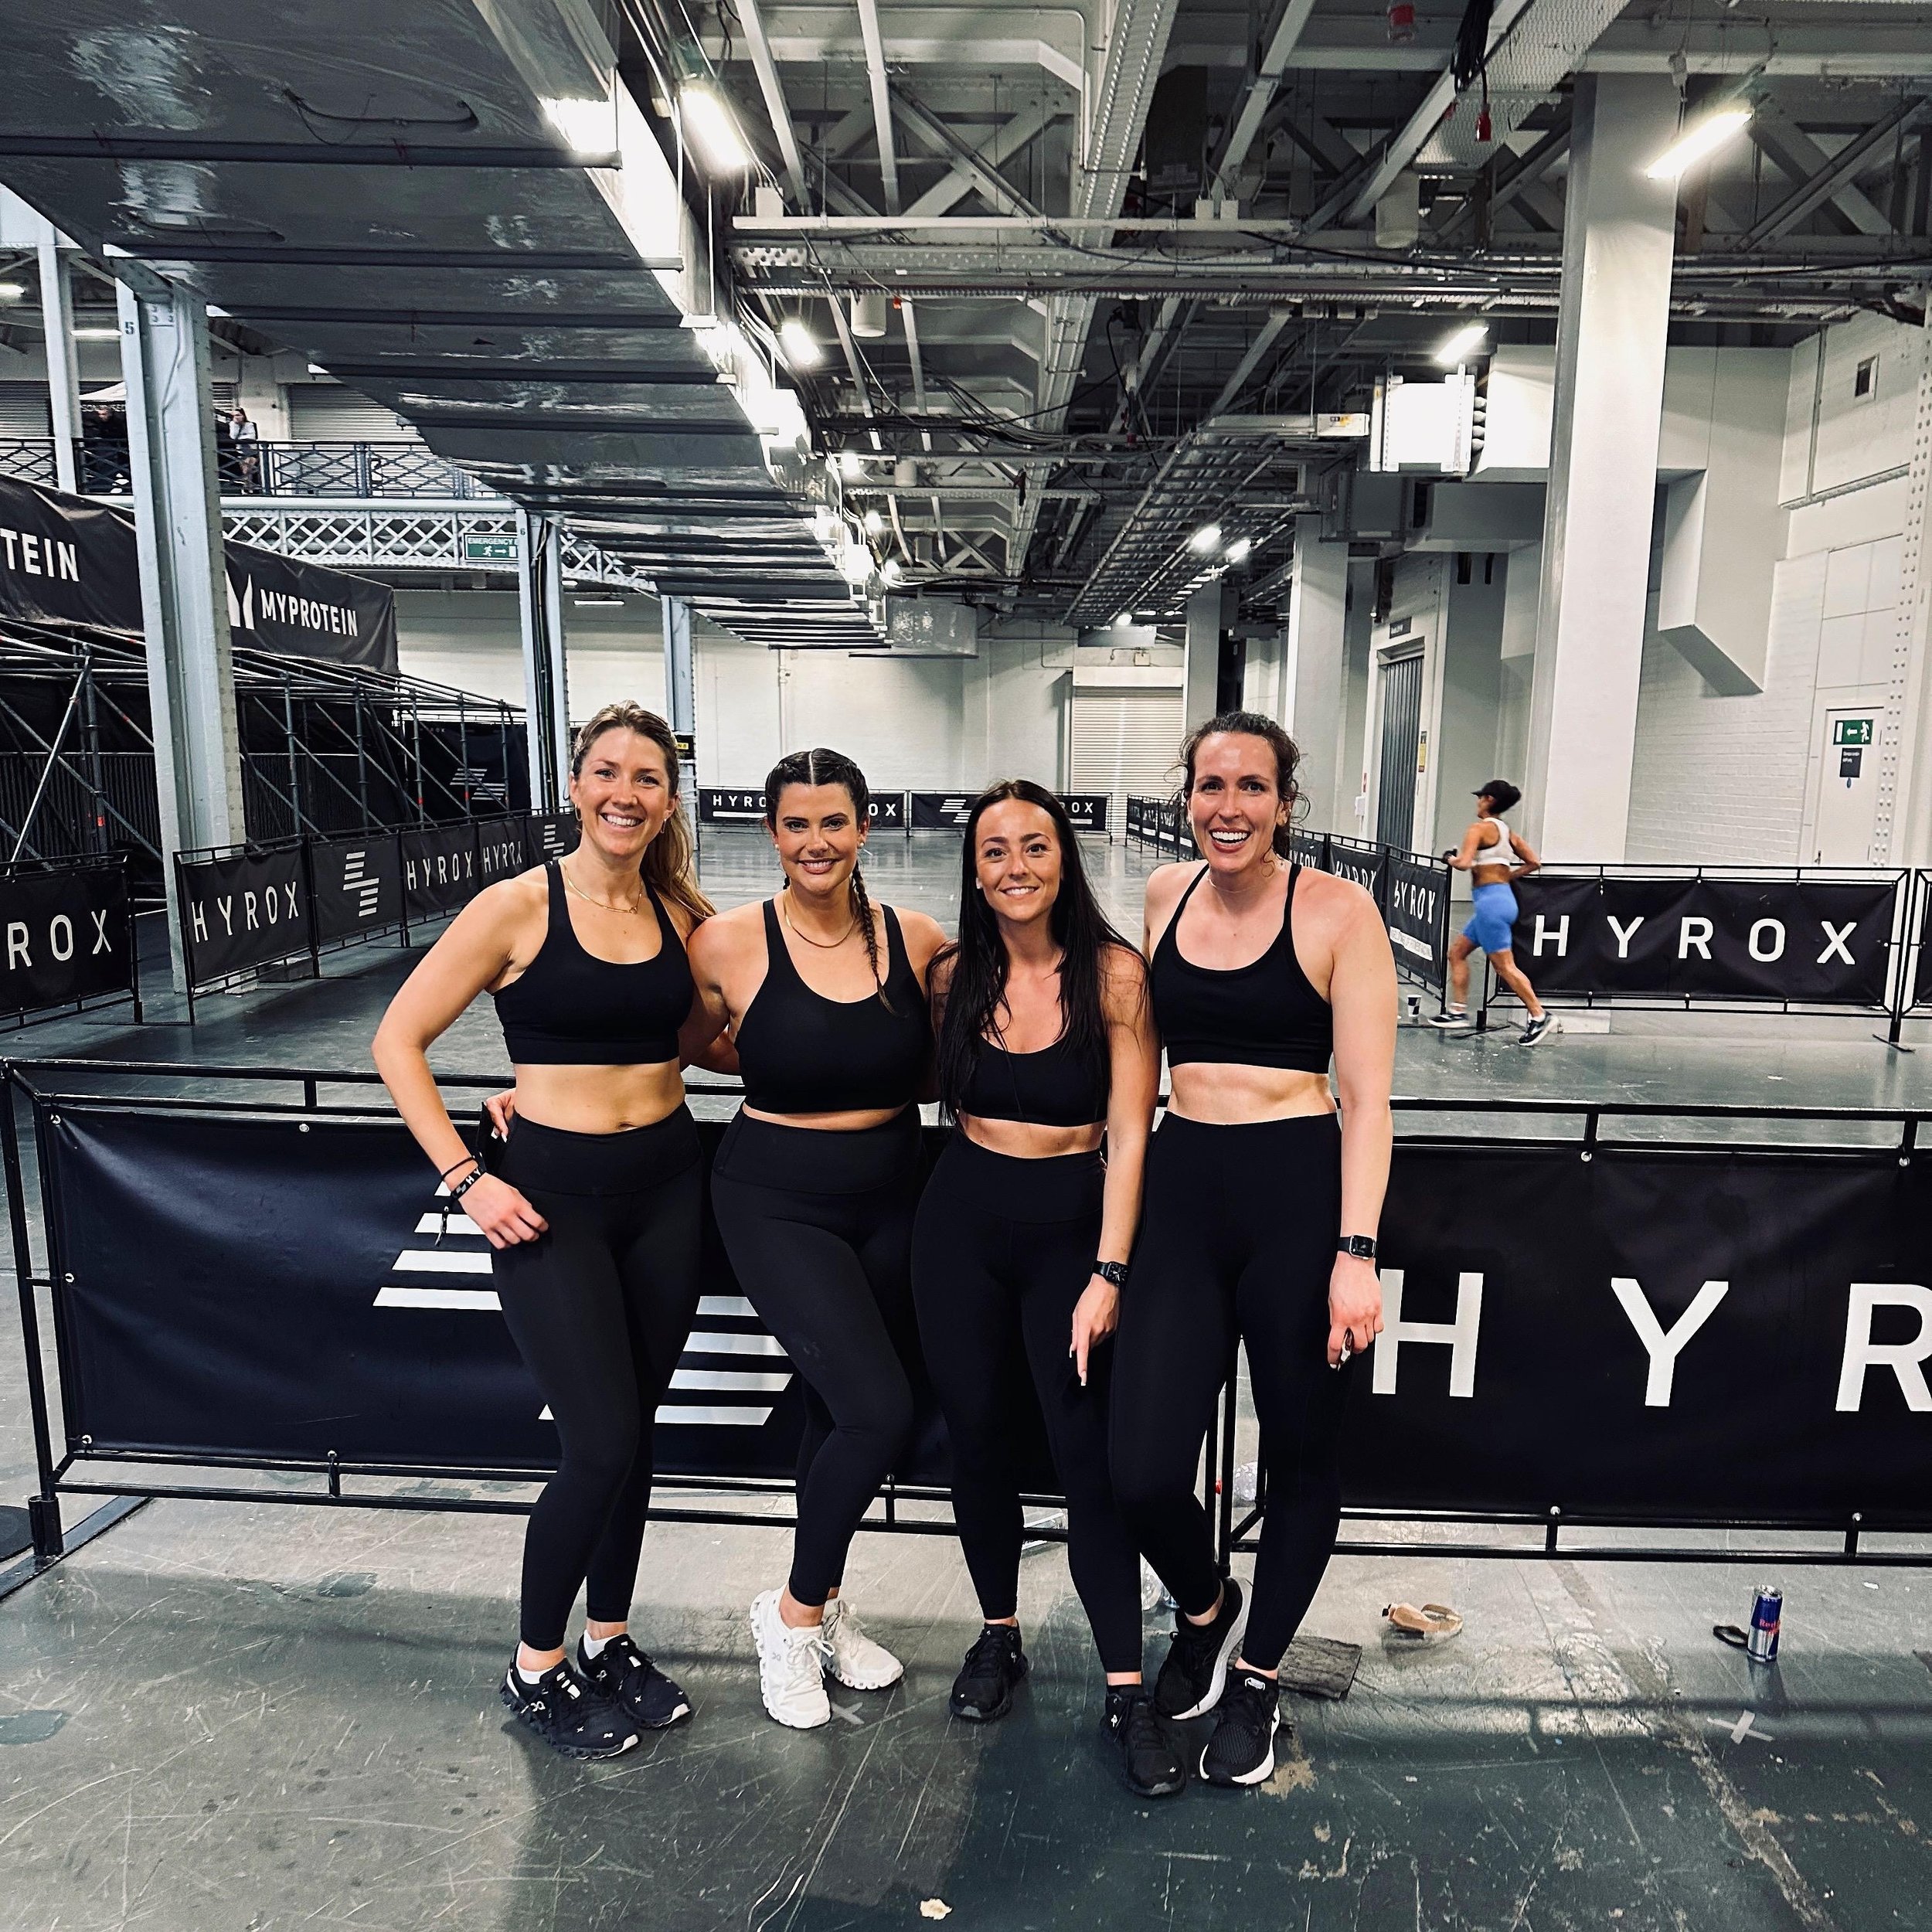 HYROX 👀🔥

Huge well done to our members who smashed their first ever HYROX competition in London this weekend! The hard work and dedication paid off, well done girls! 👏🏼

#hyrox 
#hyroxworld 
#hyroxtraining 
#R1SEBournemouth